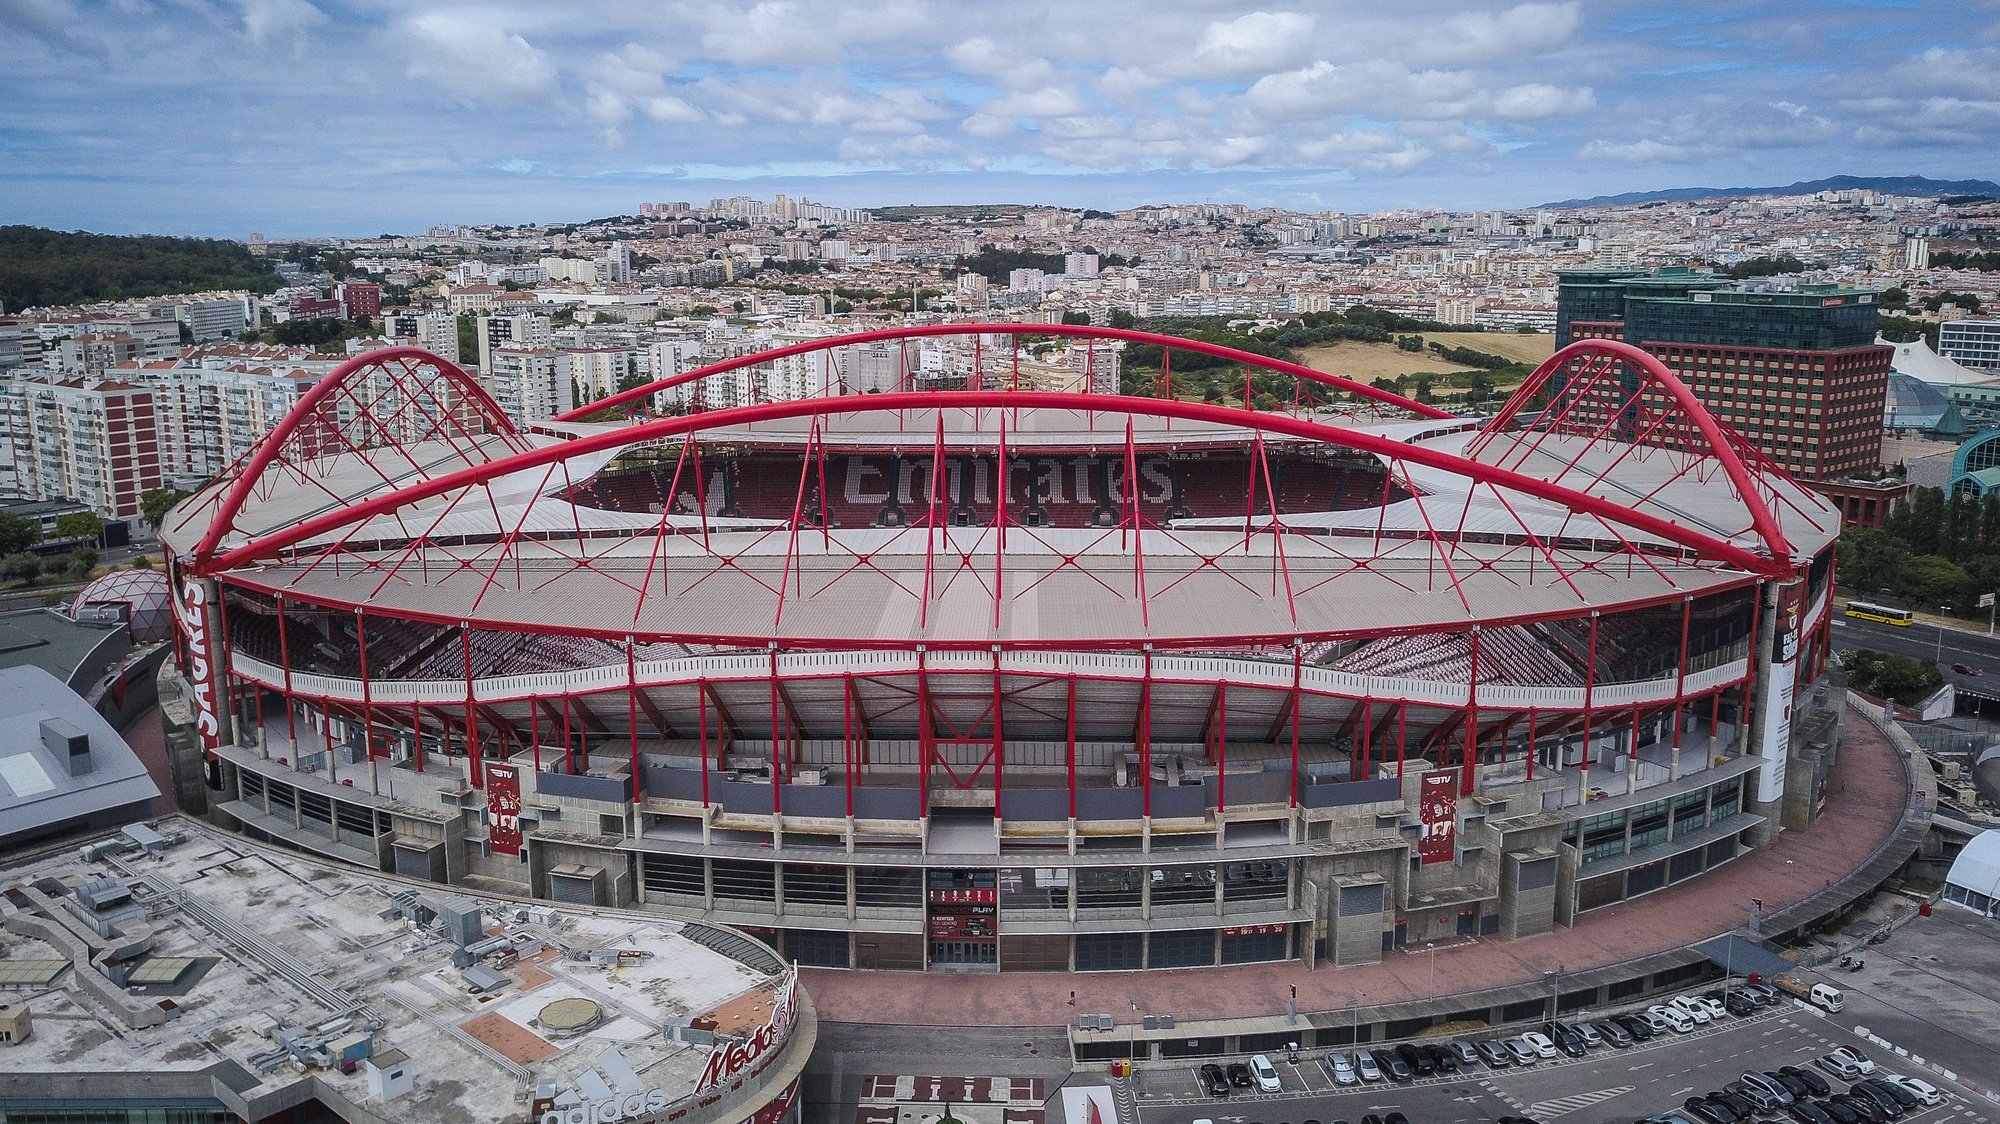 General view of the Luz Stadium where will be played the final of the UEFA Champions League 2020, in Lisbon, Portugal, 17 June 2020. The 2019/20 edition of UEFA Champions League, which was suspended in March due to the covid-19 pandemic, will be resumed with the remaining four Round of 16 matches, followed by the first-ever outcome on neutral fields, at Luz and Jose Alvalade stadiums in Lisbon. MARIO CRUZ/LUSA